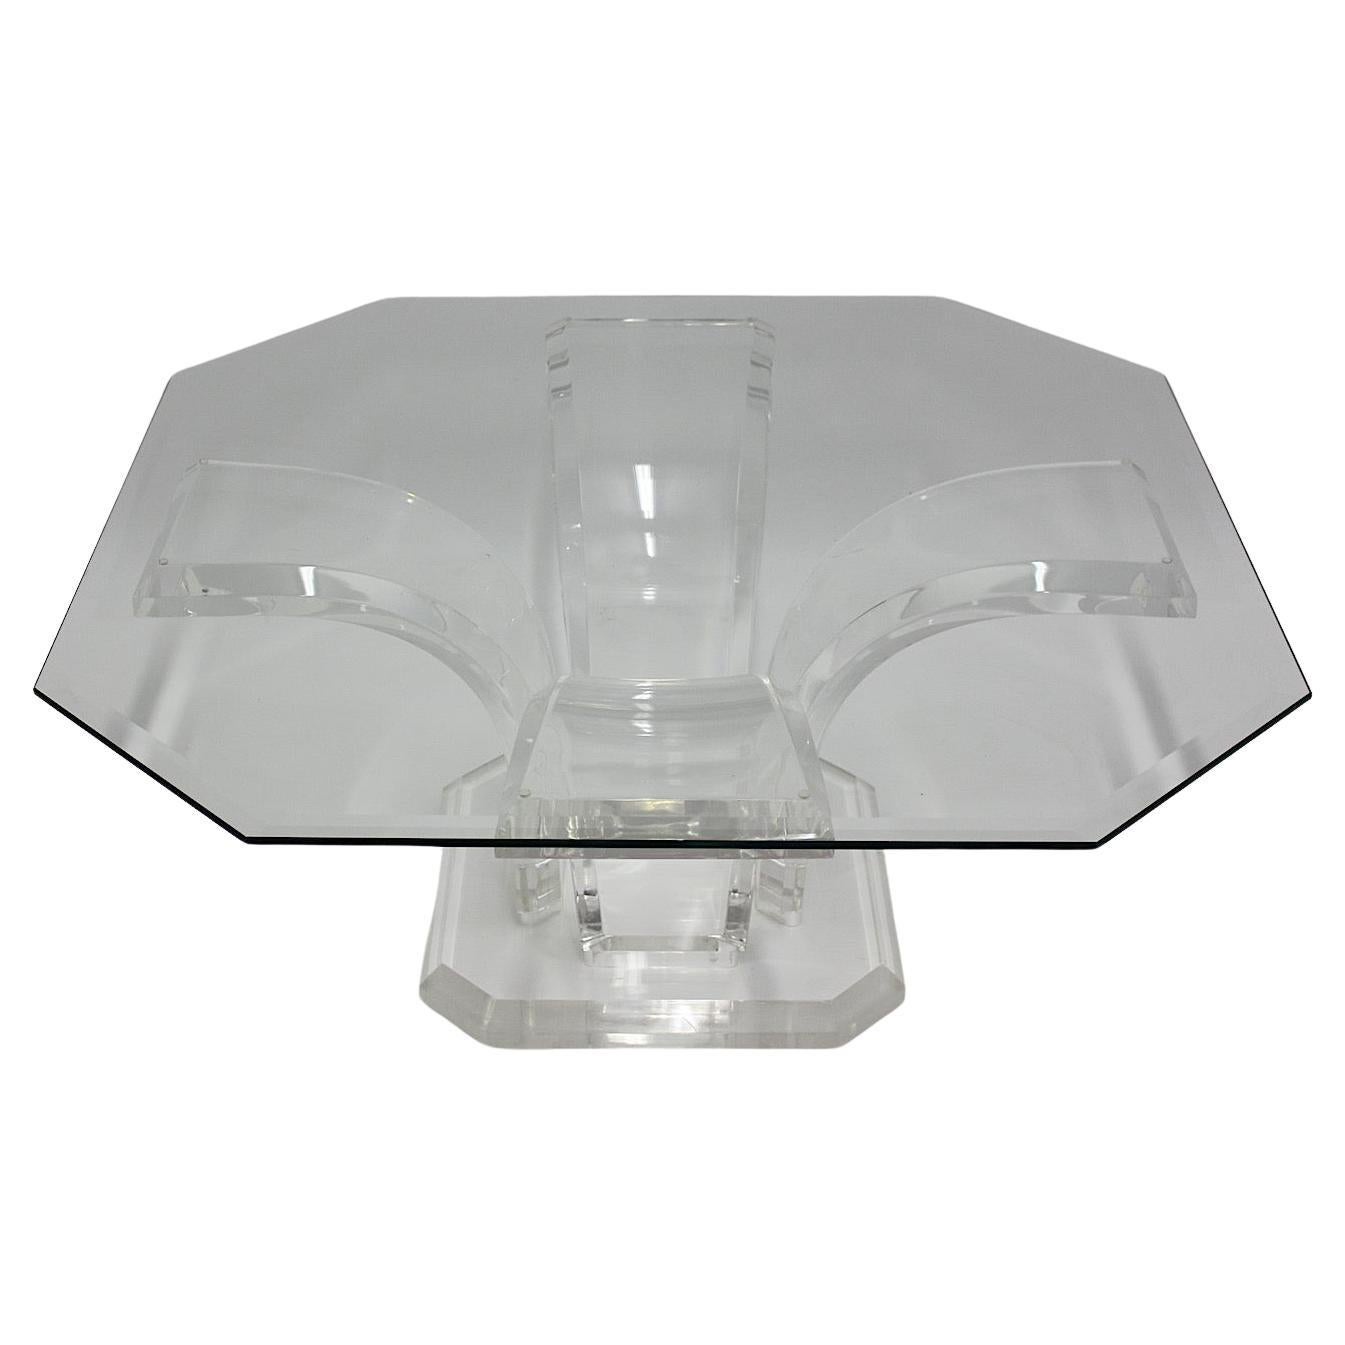 Space Age Vintage Rectangular Transparent Lucite Glass Coffee Table circa 1970 For Sale